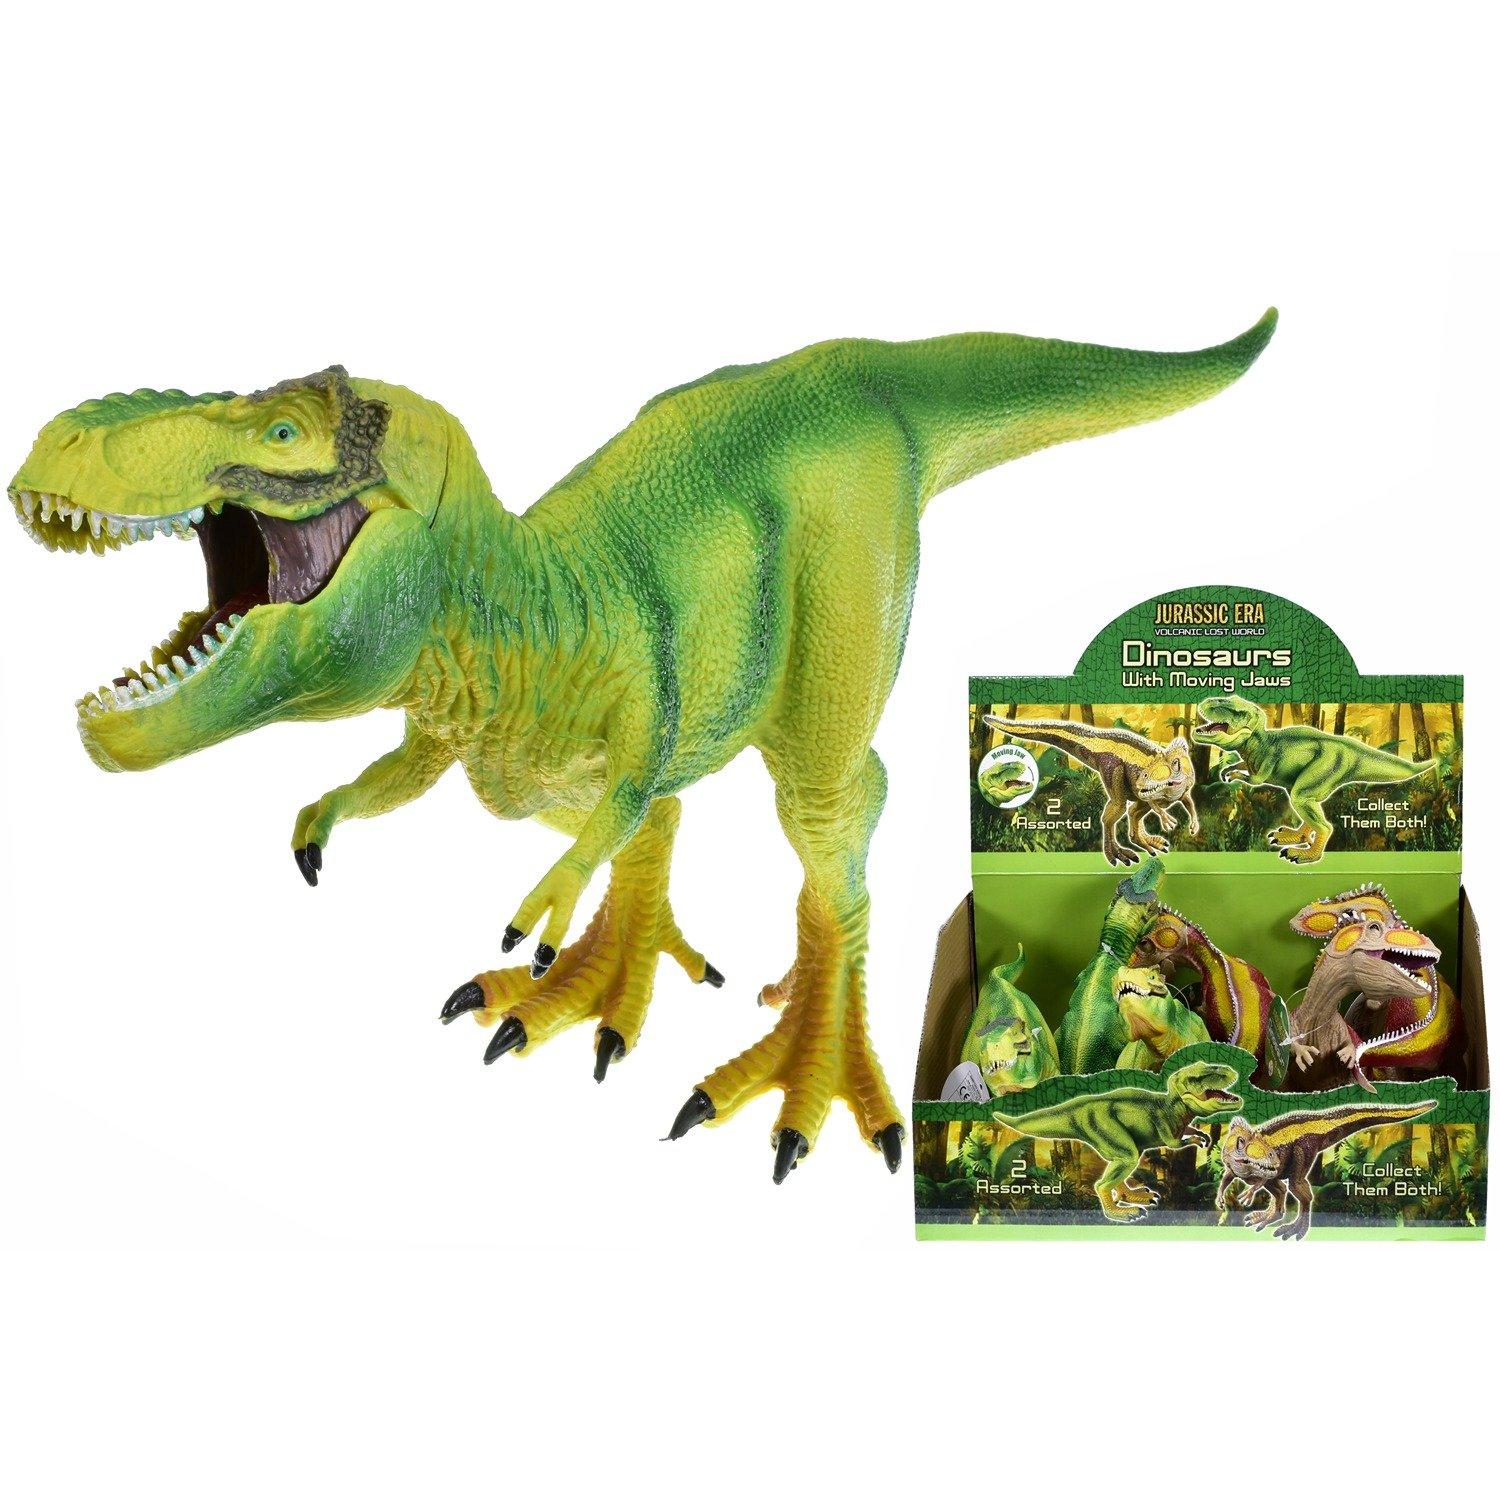 27cm Dinosaur With Moving Jaw (Styles Vary)